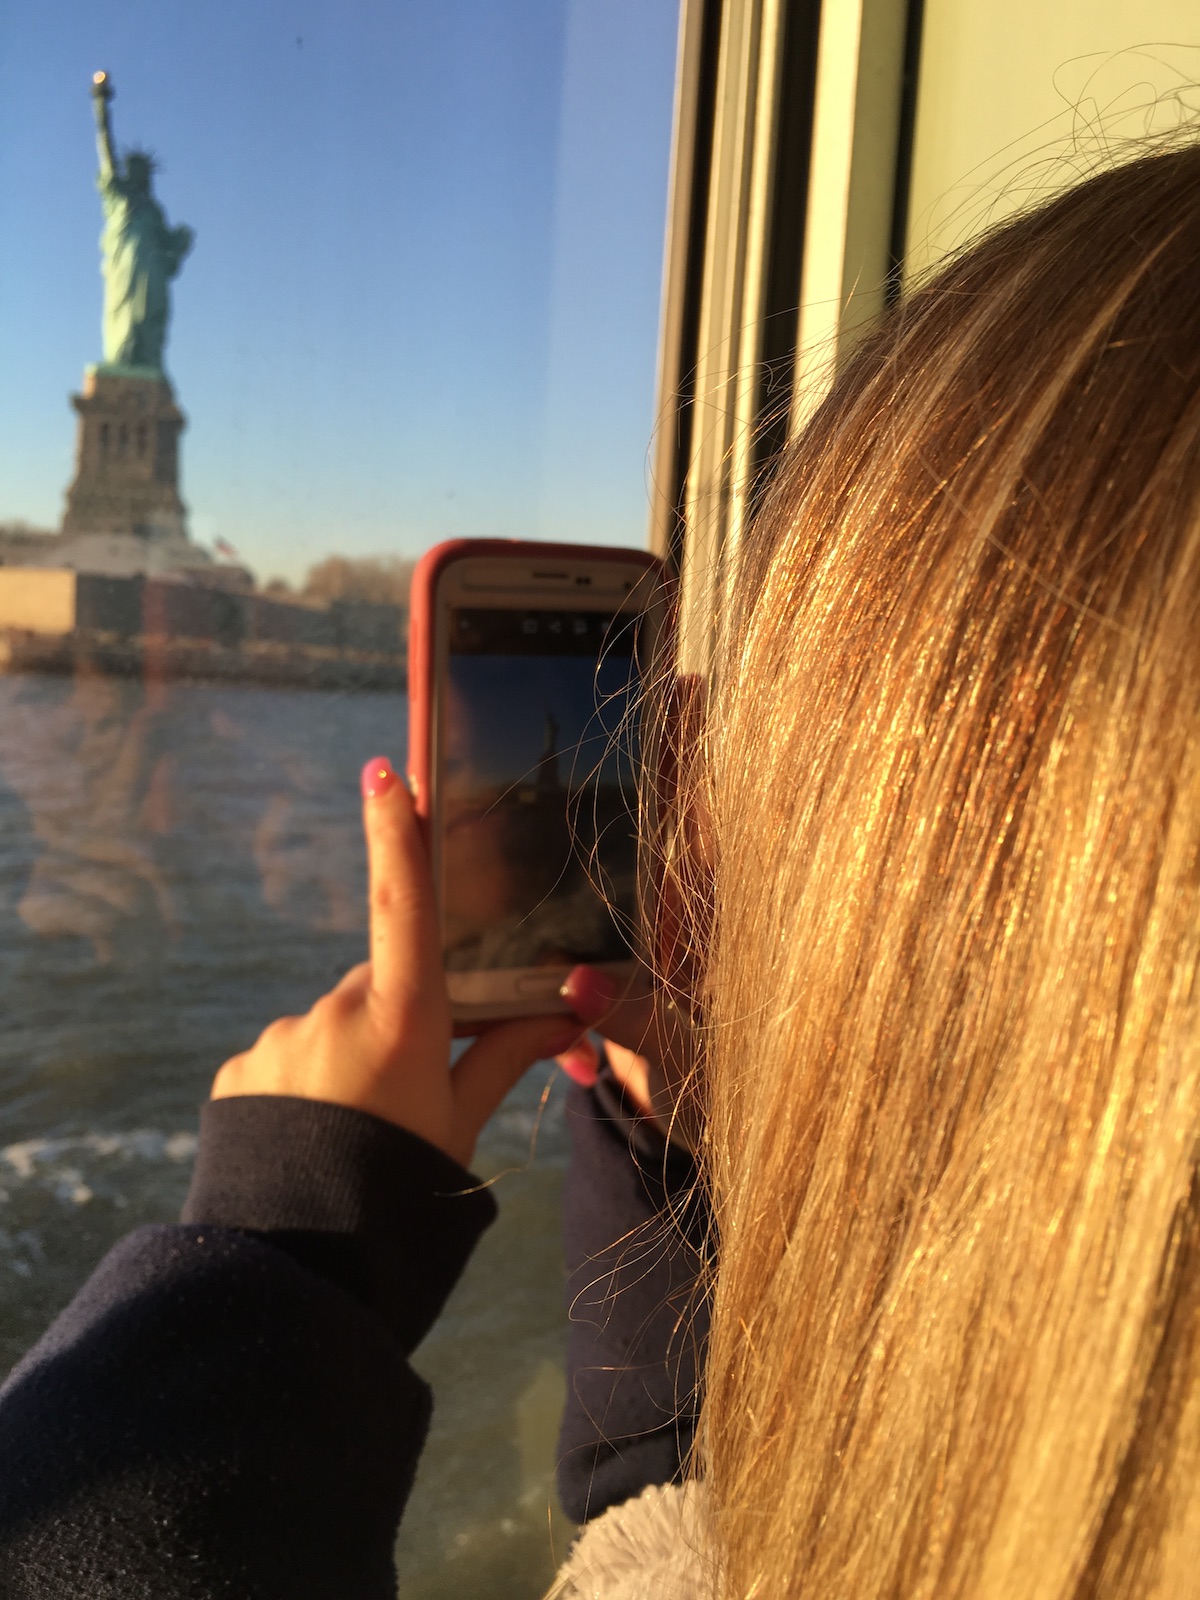 Taking a picture of the Statue of Liberty